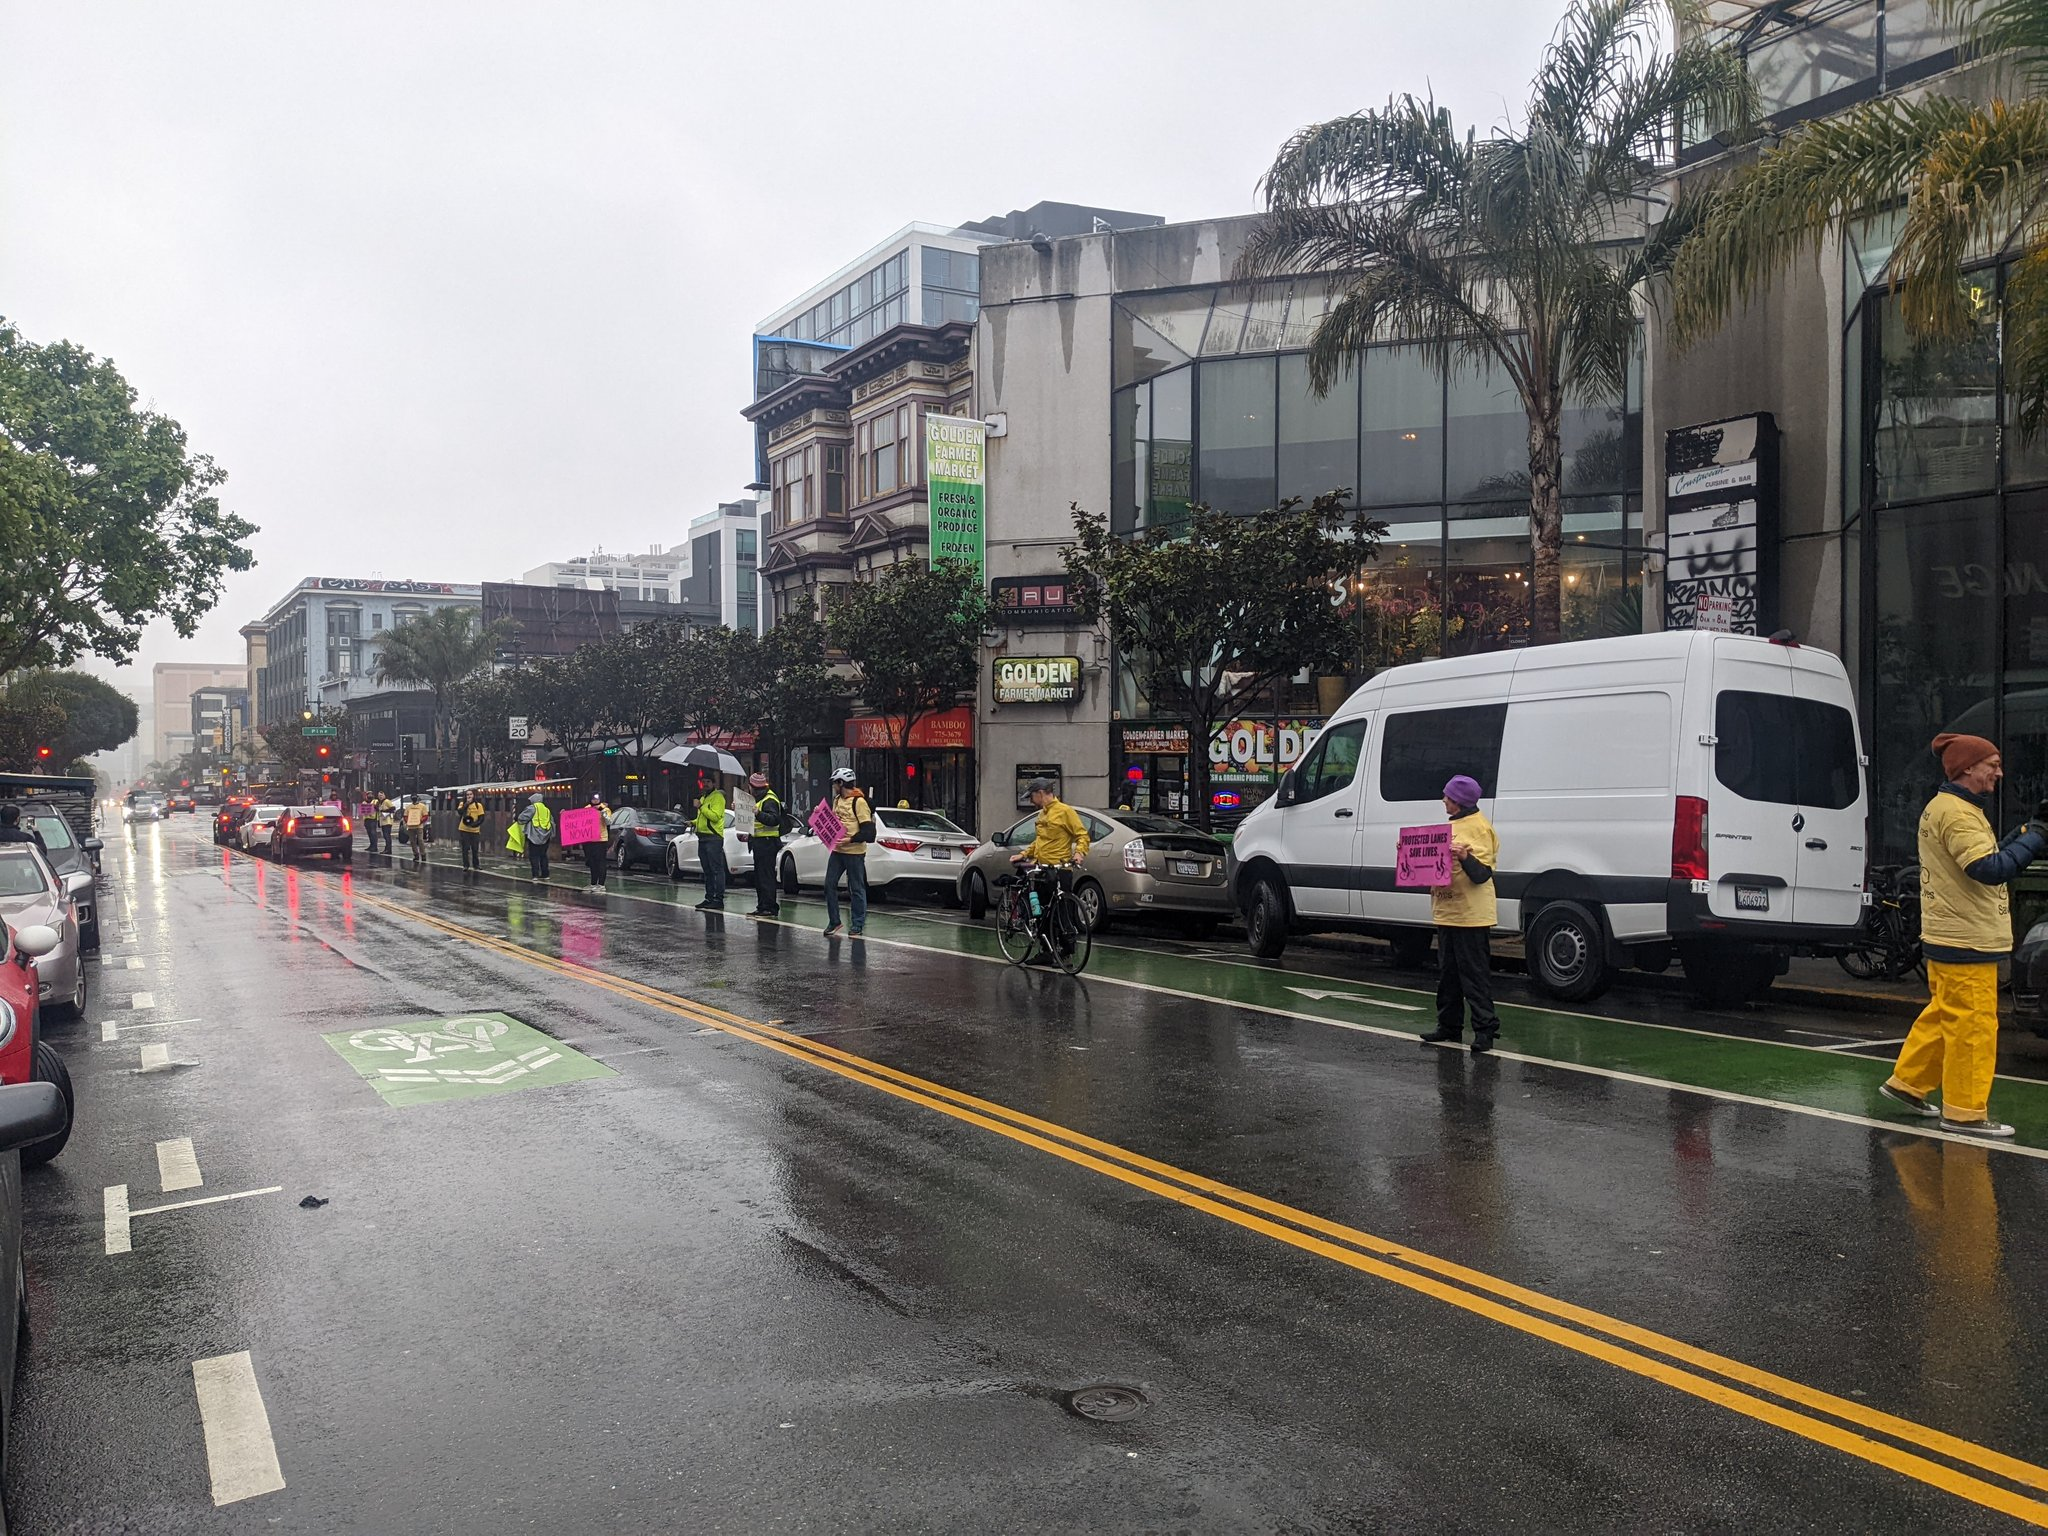 A dozen people, mostly in yellow shirts, stand between the green bike lane on Polk street and the road in the rain, keeping cars out of the bike lane.